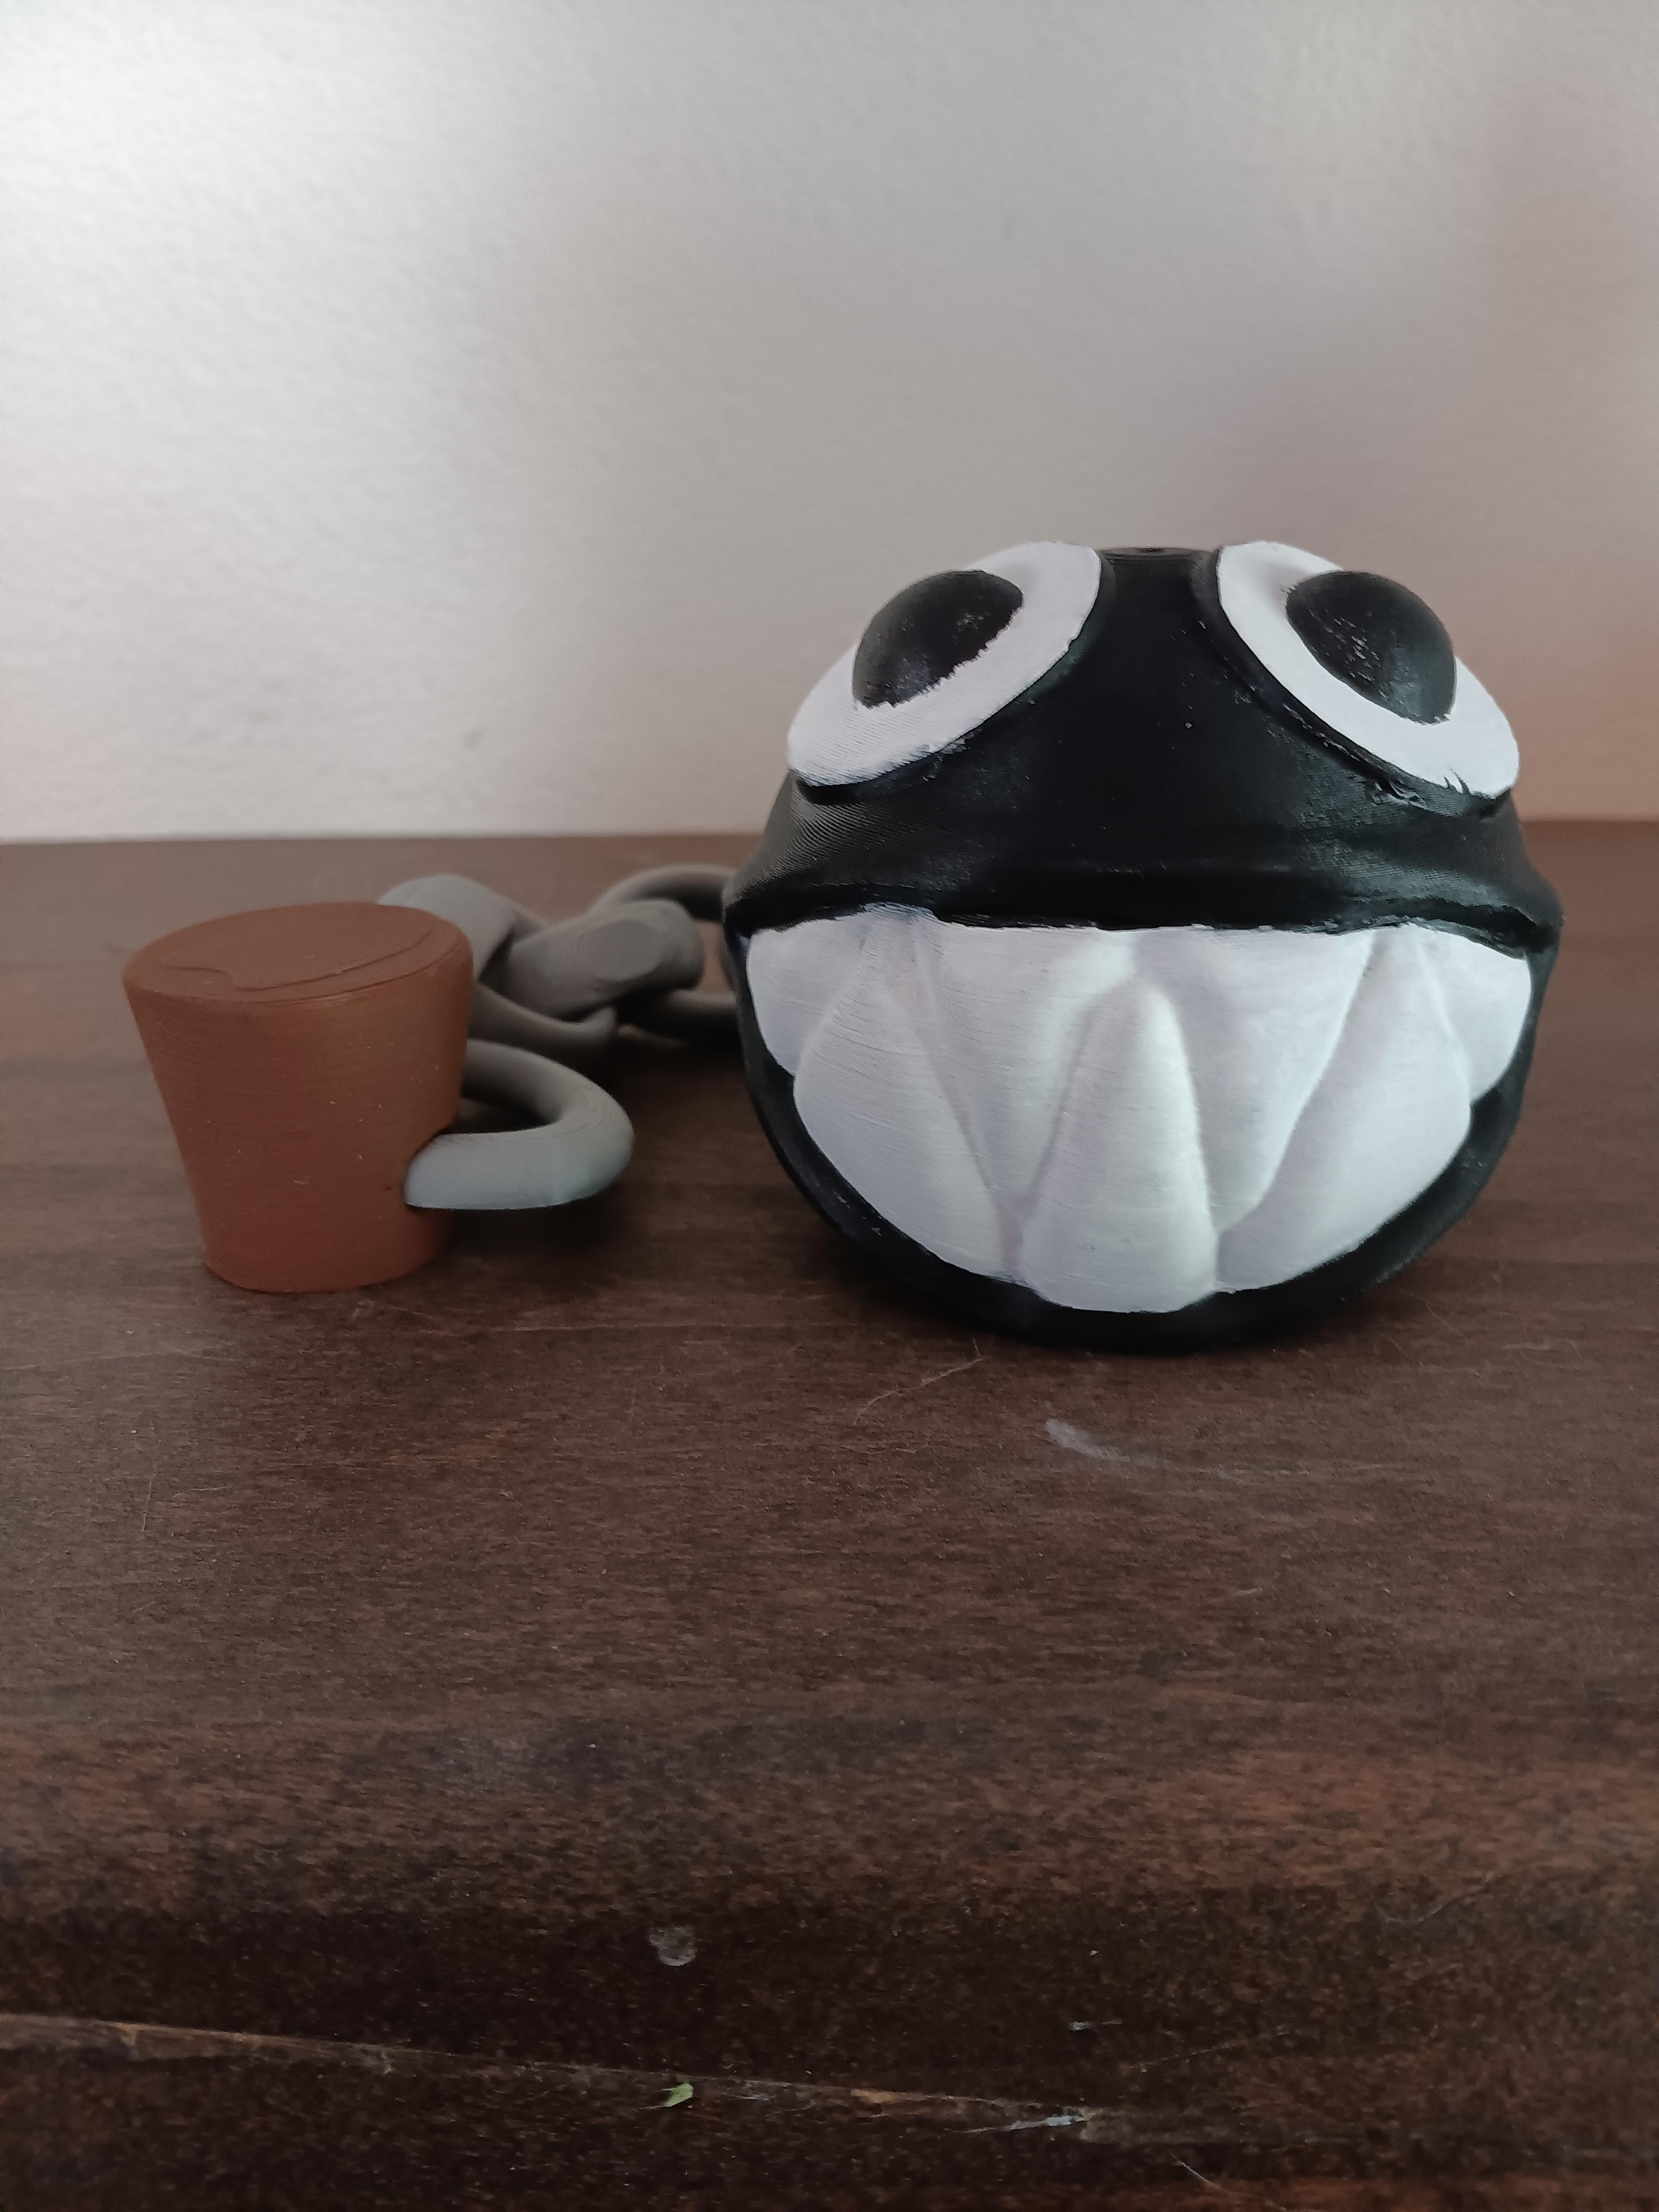 chain chomp with slots for magnets - print in place - flexi fidget toy 3d model